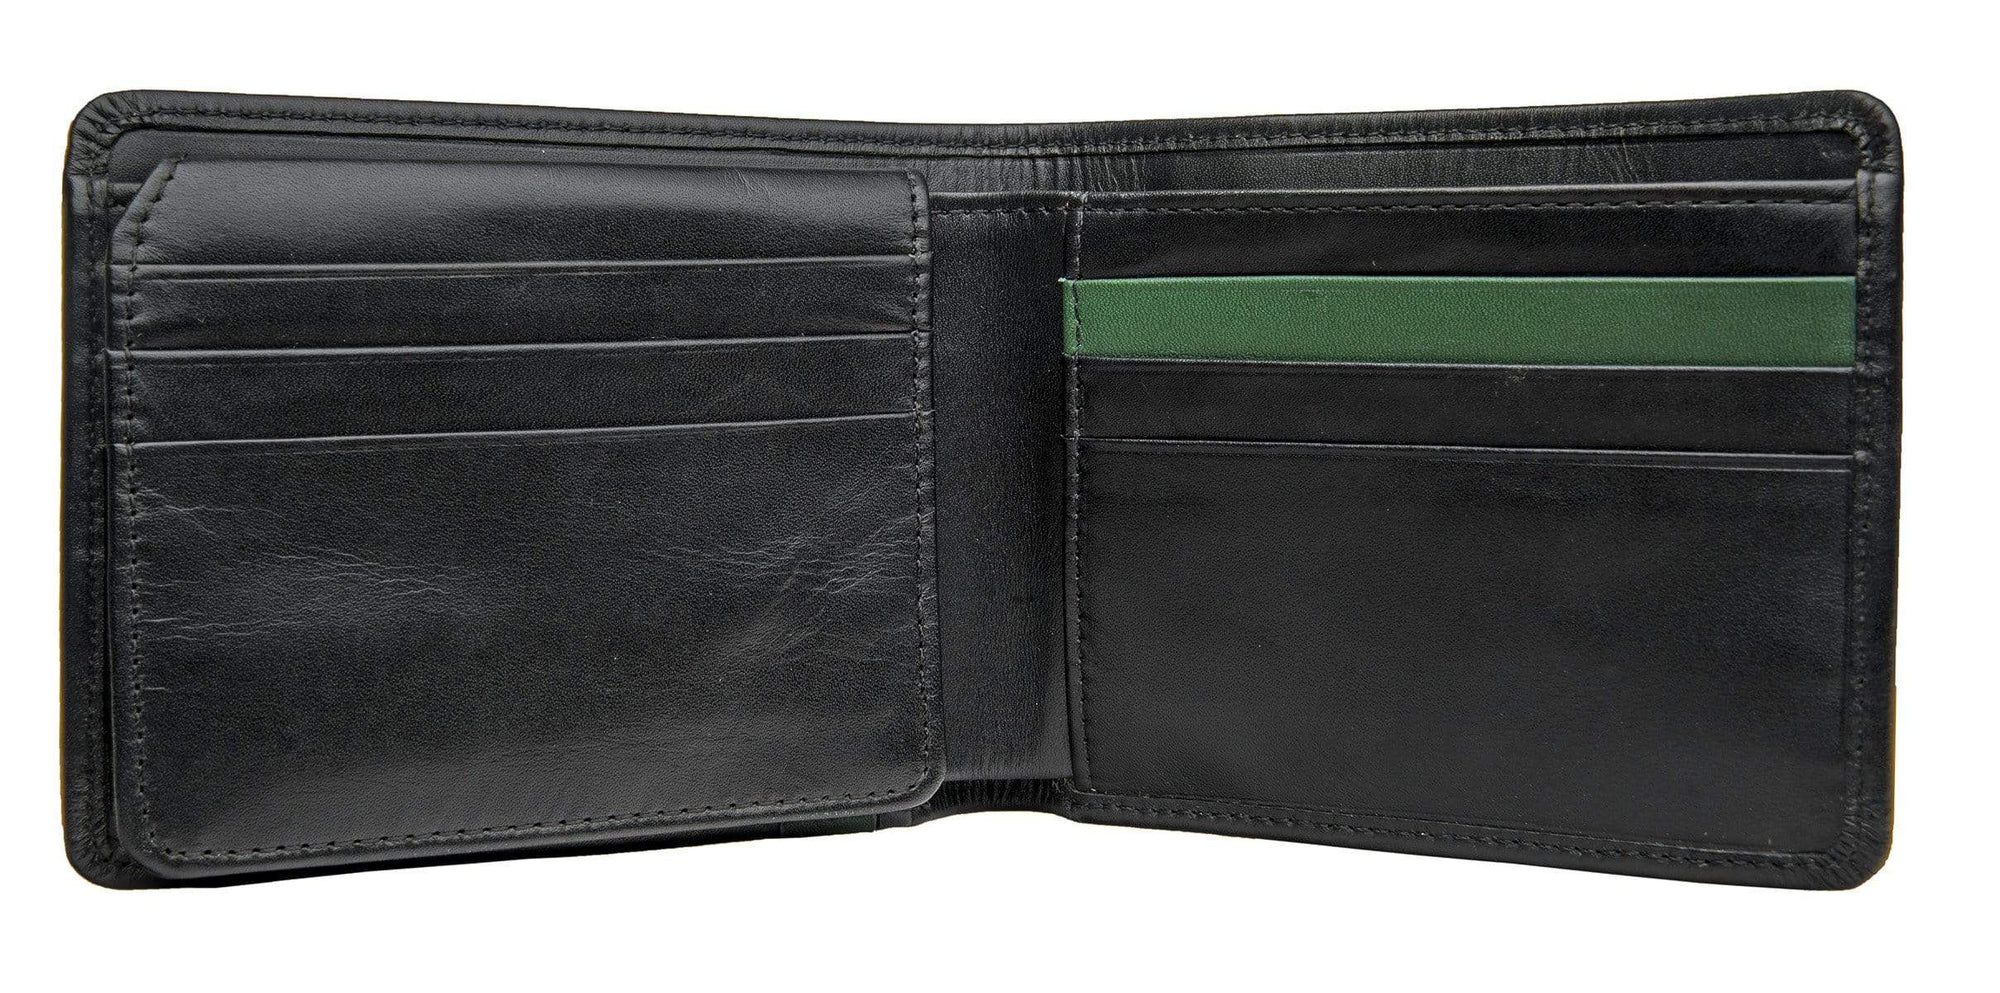 Hidesign Dylan Leather Trifold Wallet